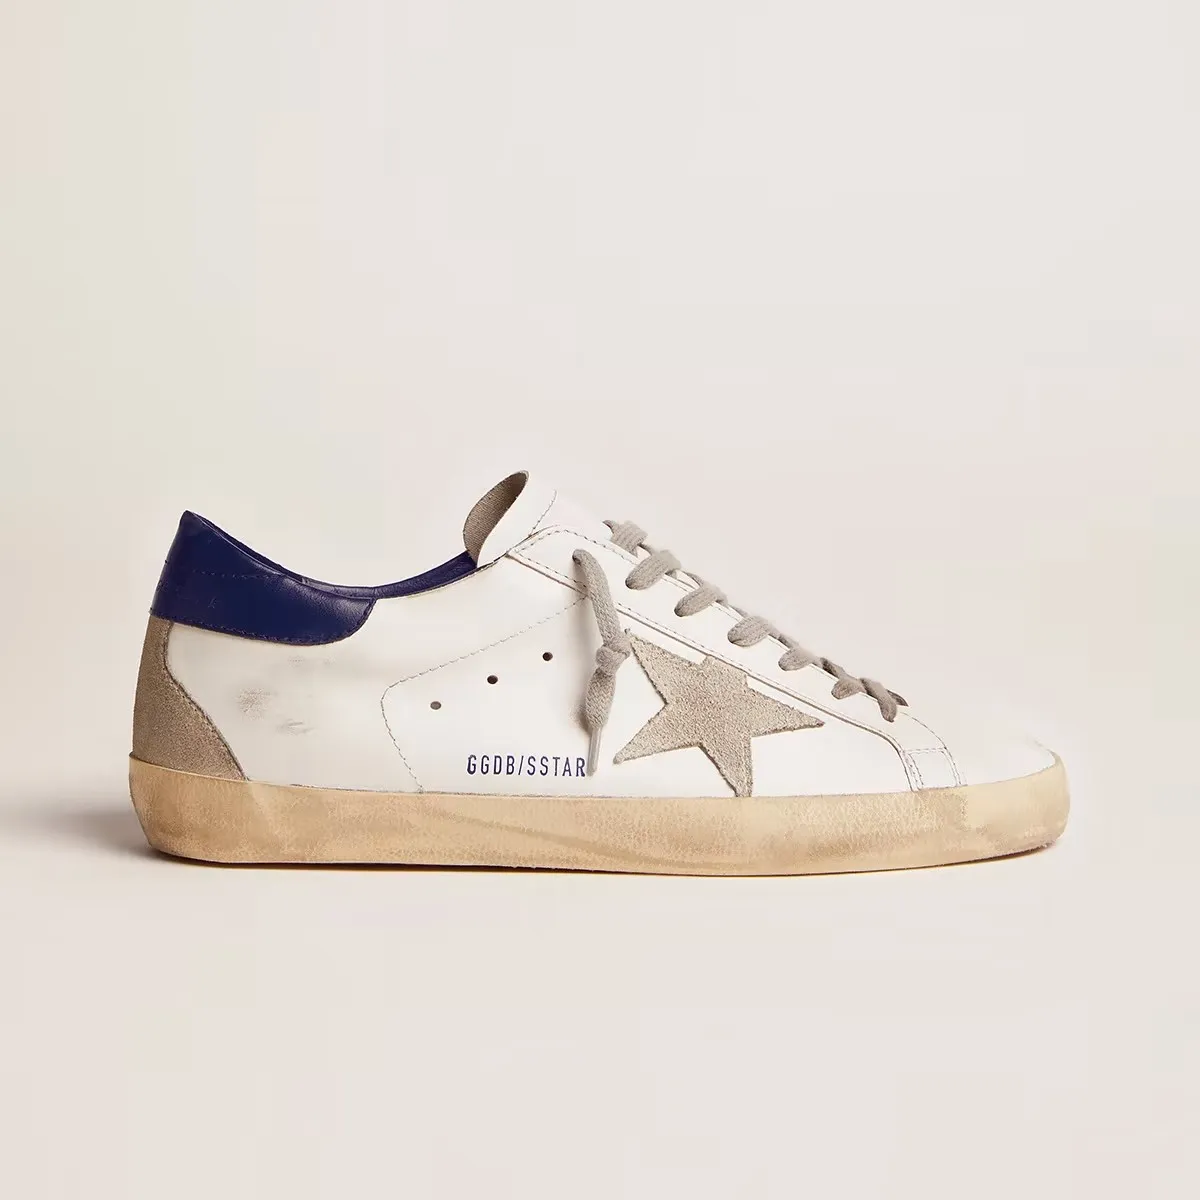 Sports Fashion Shoes Super-Star sneakers with suede star and blue heel tab Goldens Sneakers Gooses